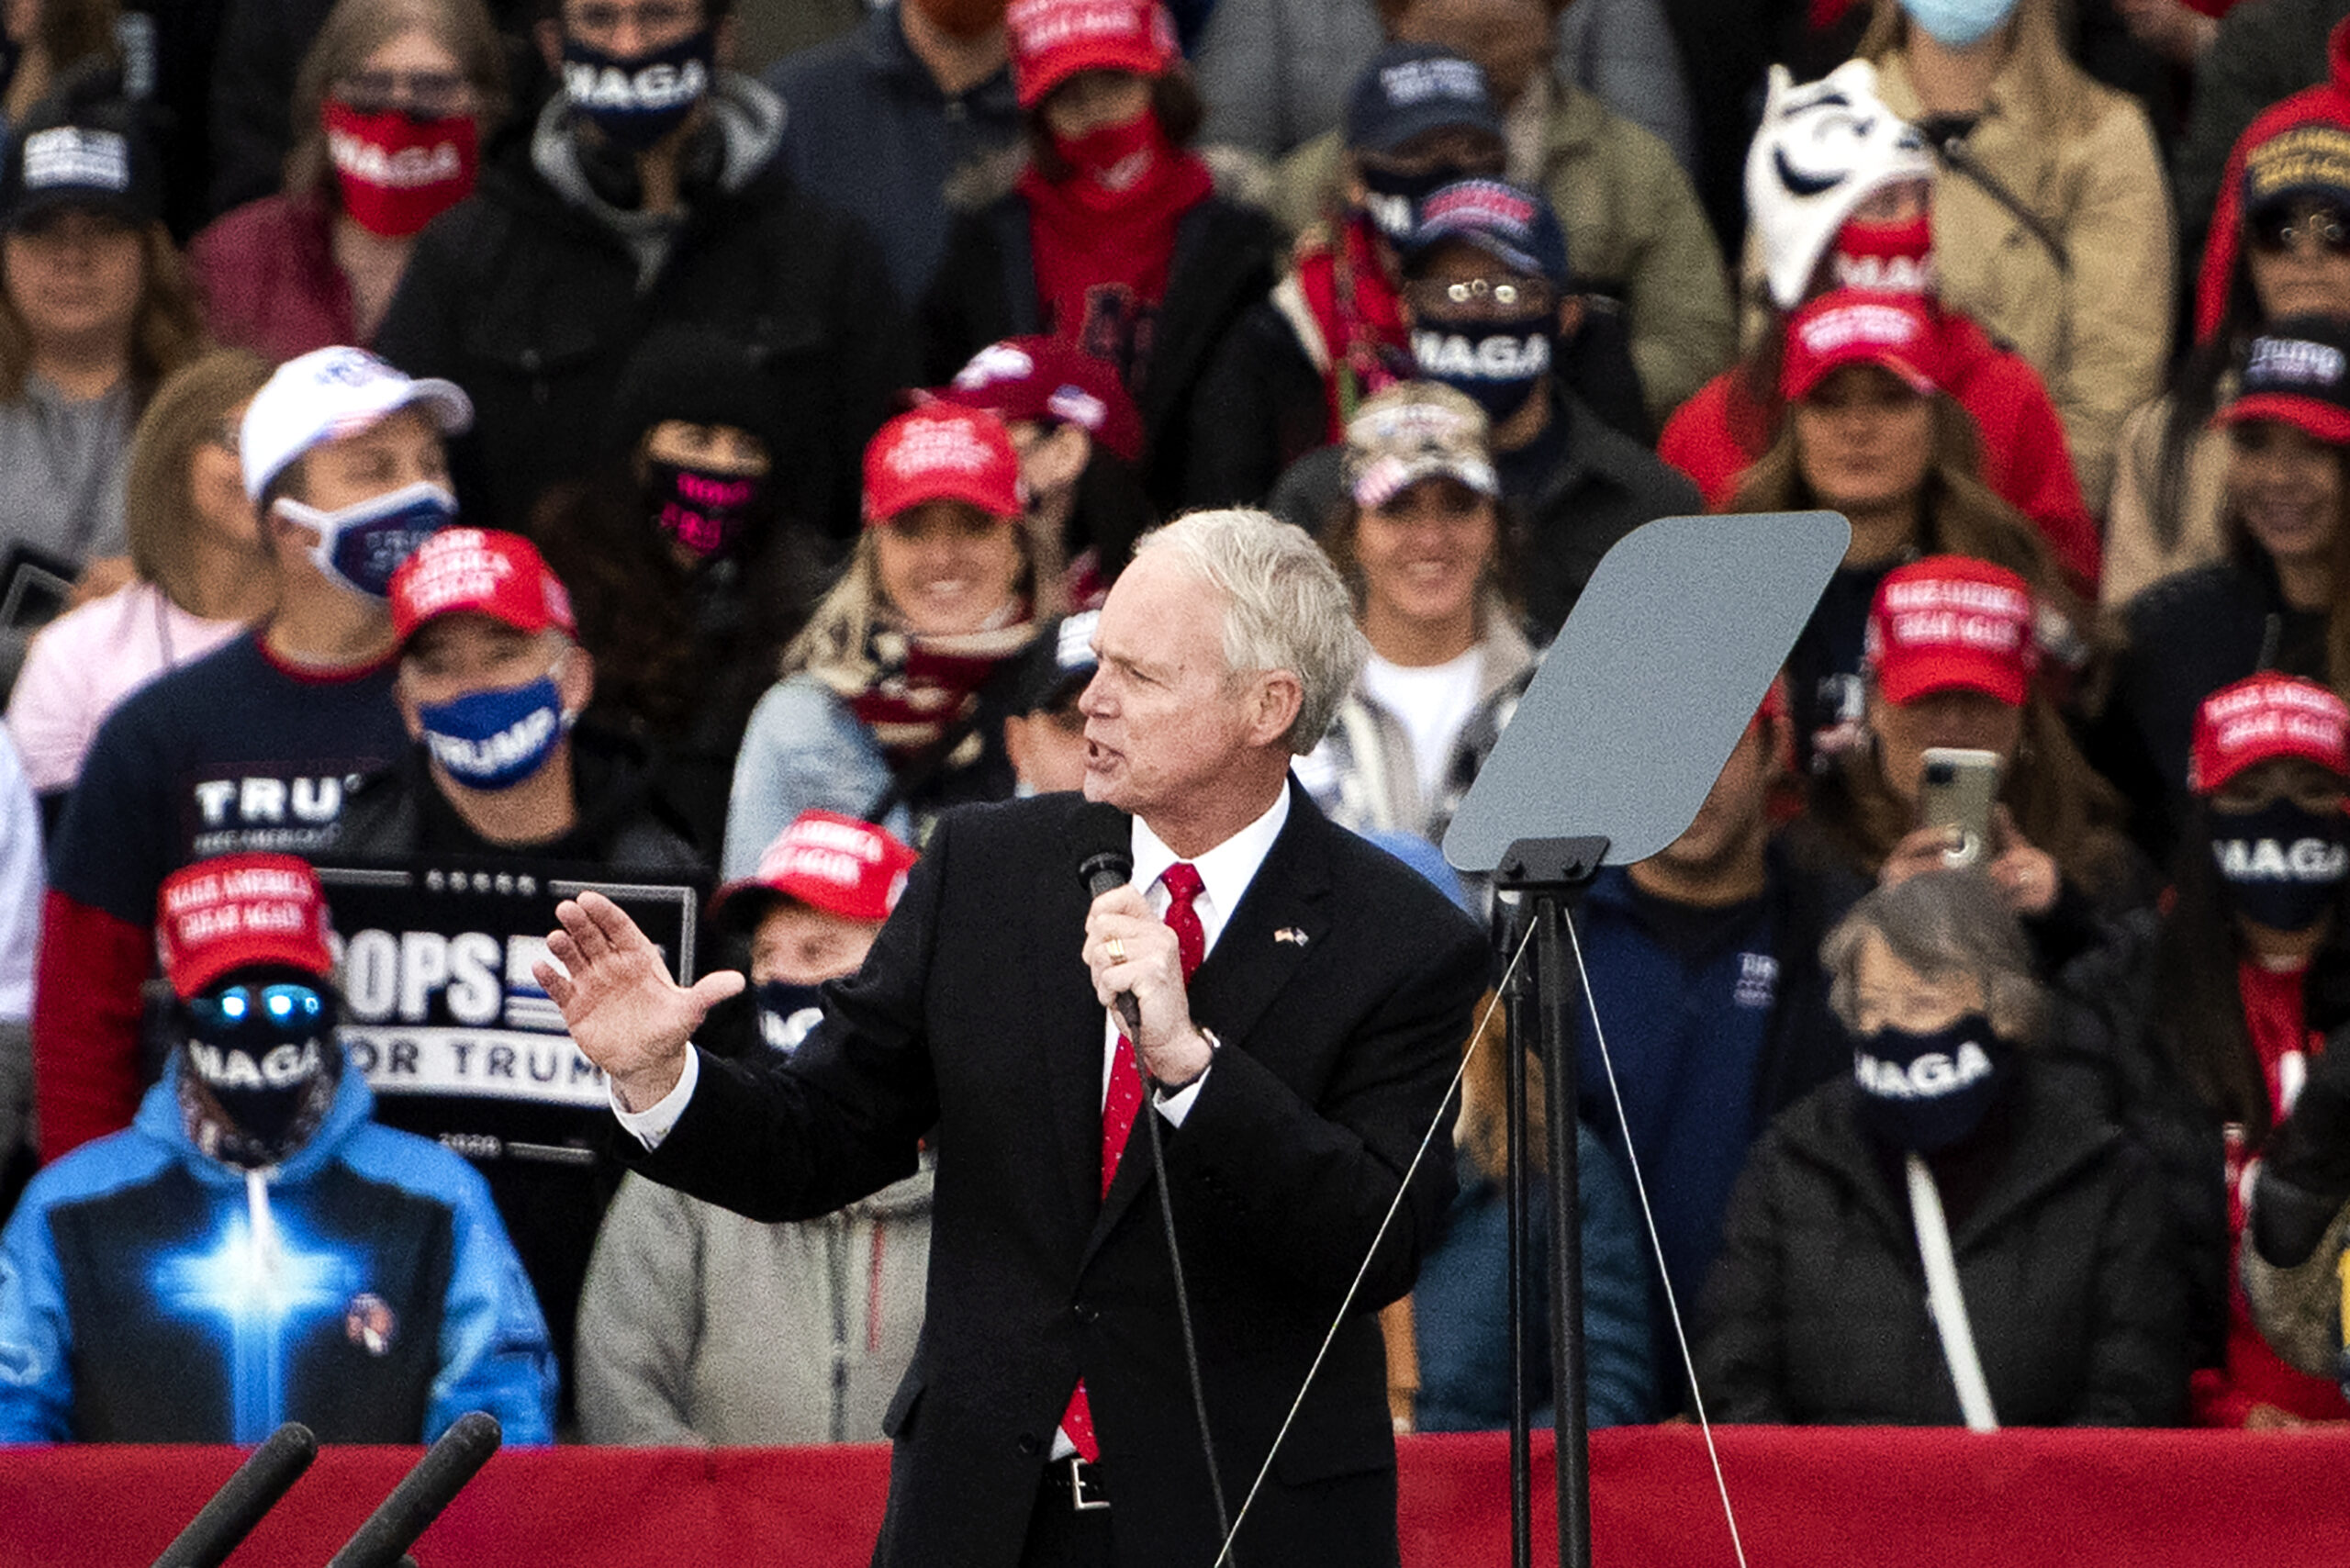 Trump supporters in MAGA hats can be seen behind Sen. Ron Johnson as he speaks into a microphone